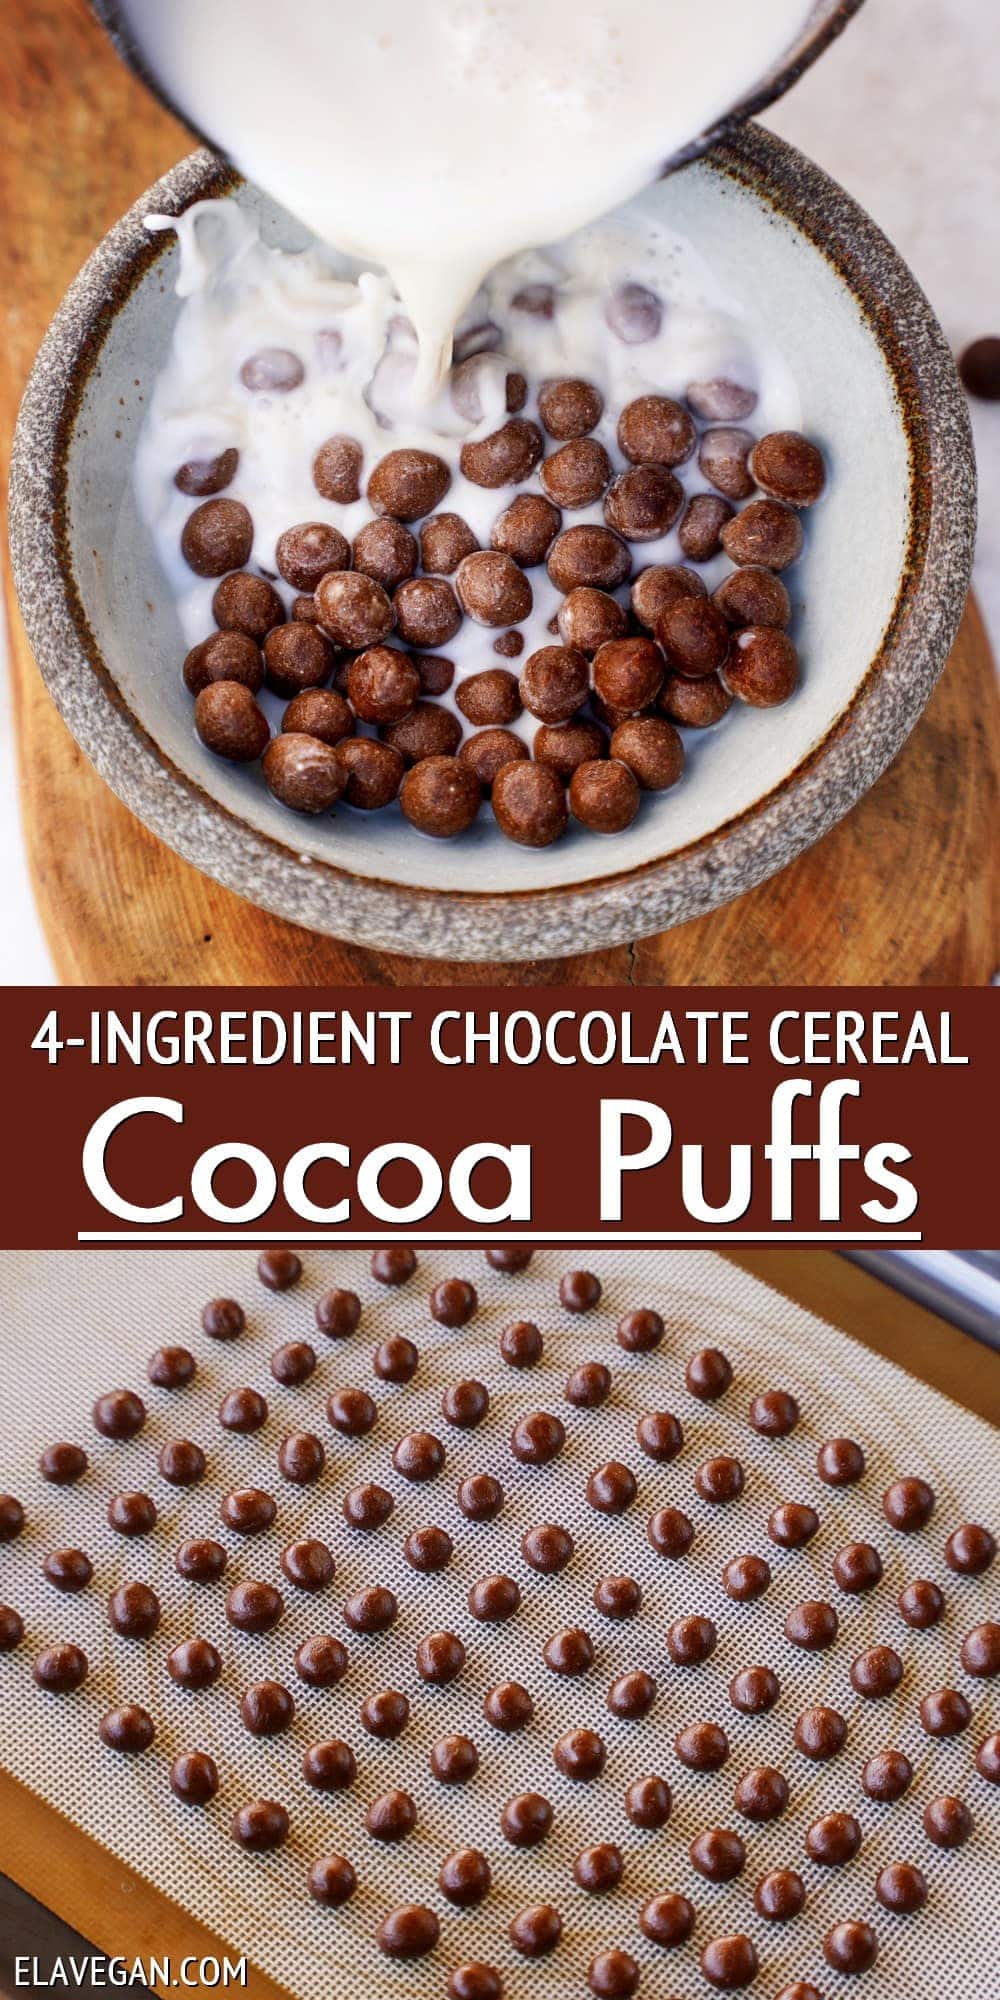 Pinterest Collage 4-ingredient chocolate cereal cocoa puffs